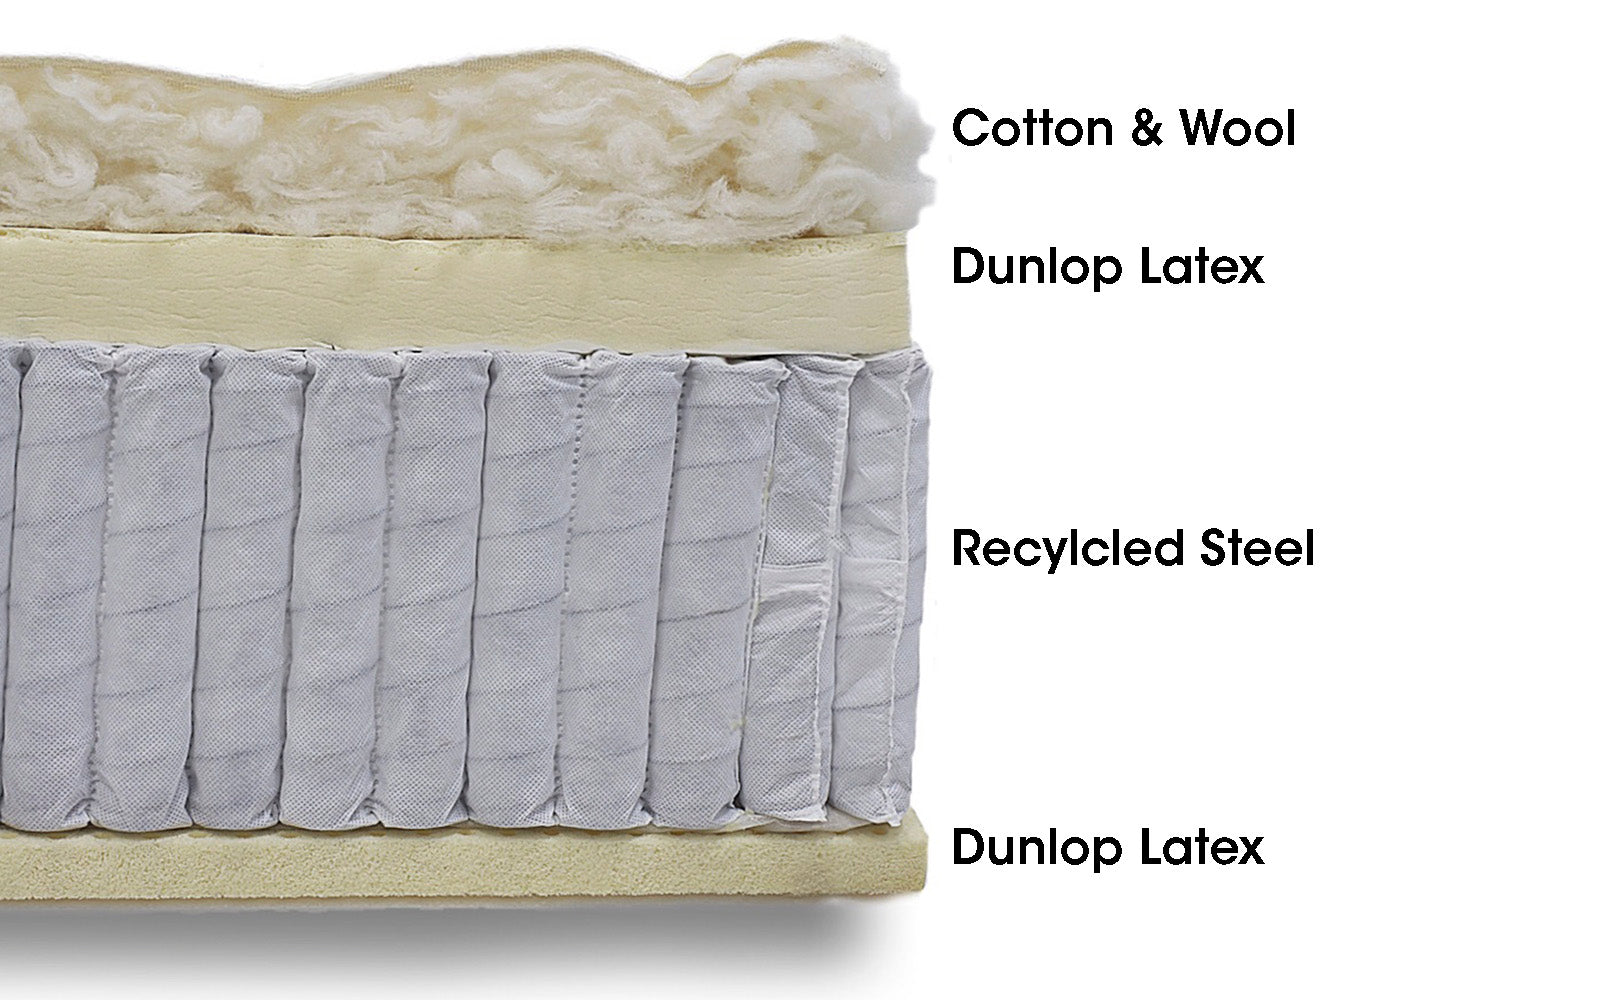 a detailed image of our mattress layers illustrating the fact that we do not use fiberglass or chemically treated FR socks